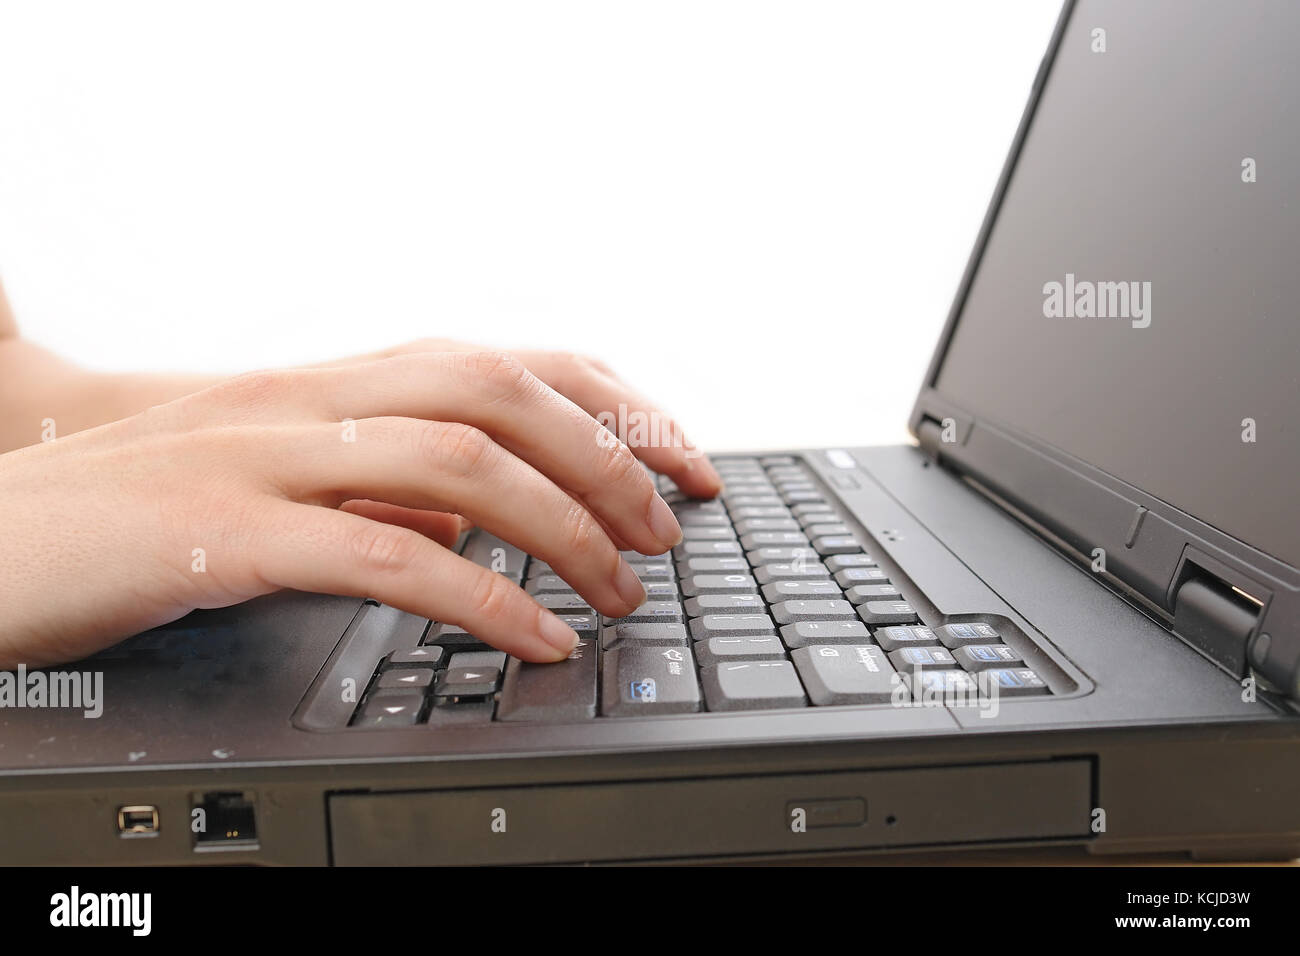 Closeup of female hands on laptop keyboard Stock Photo